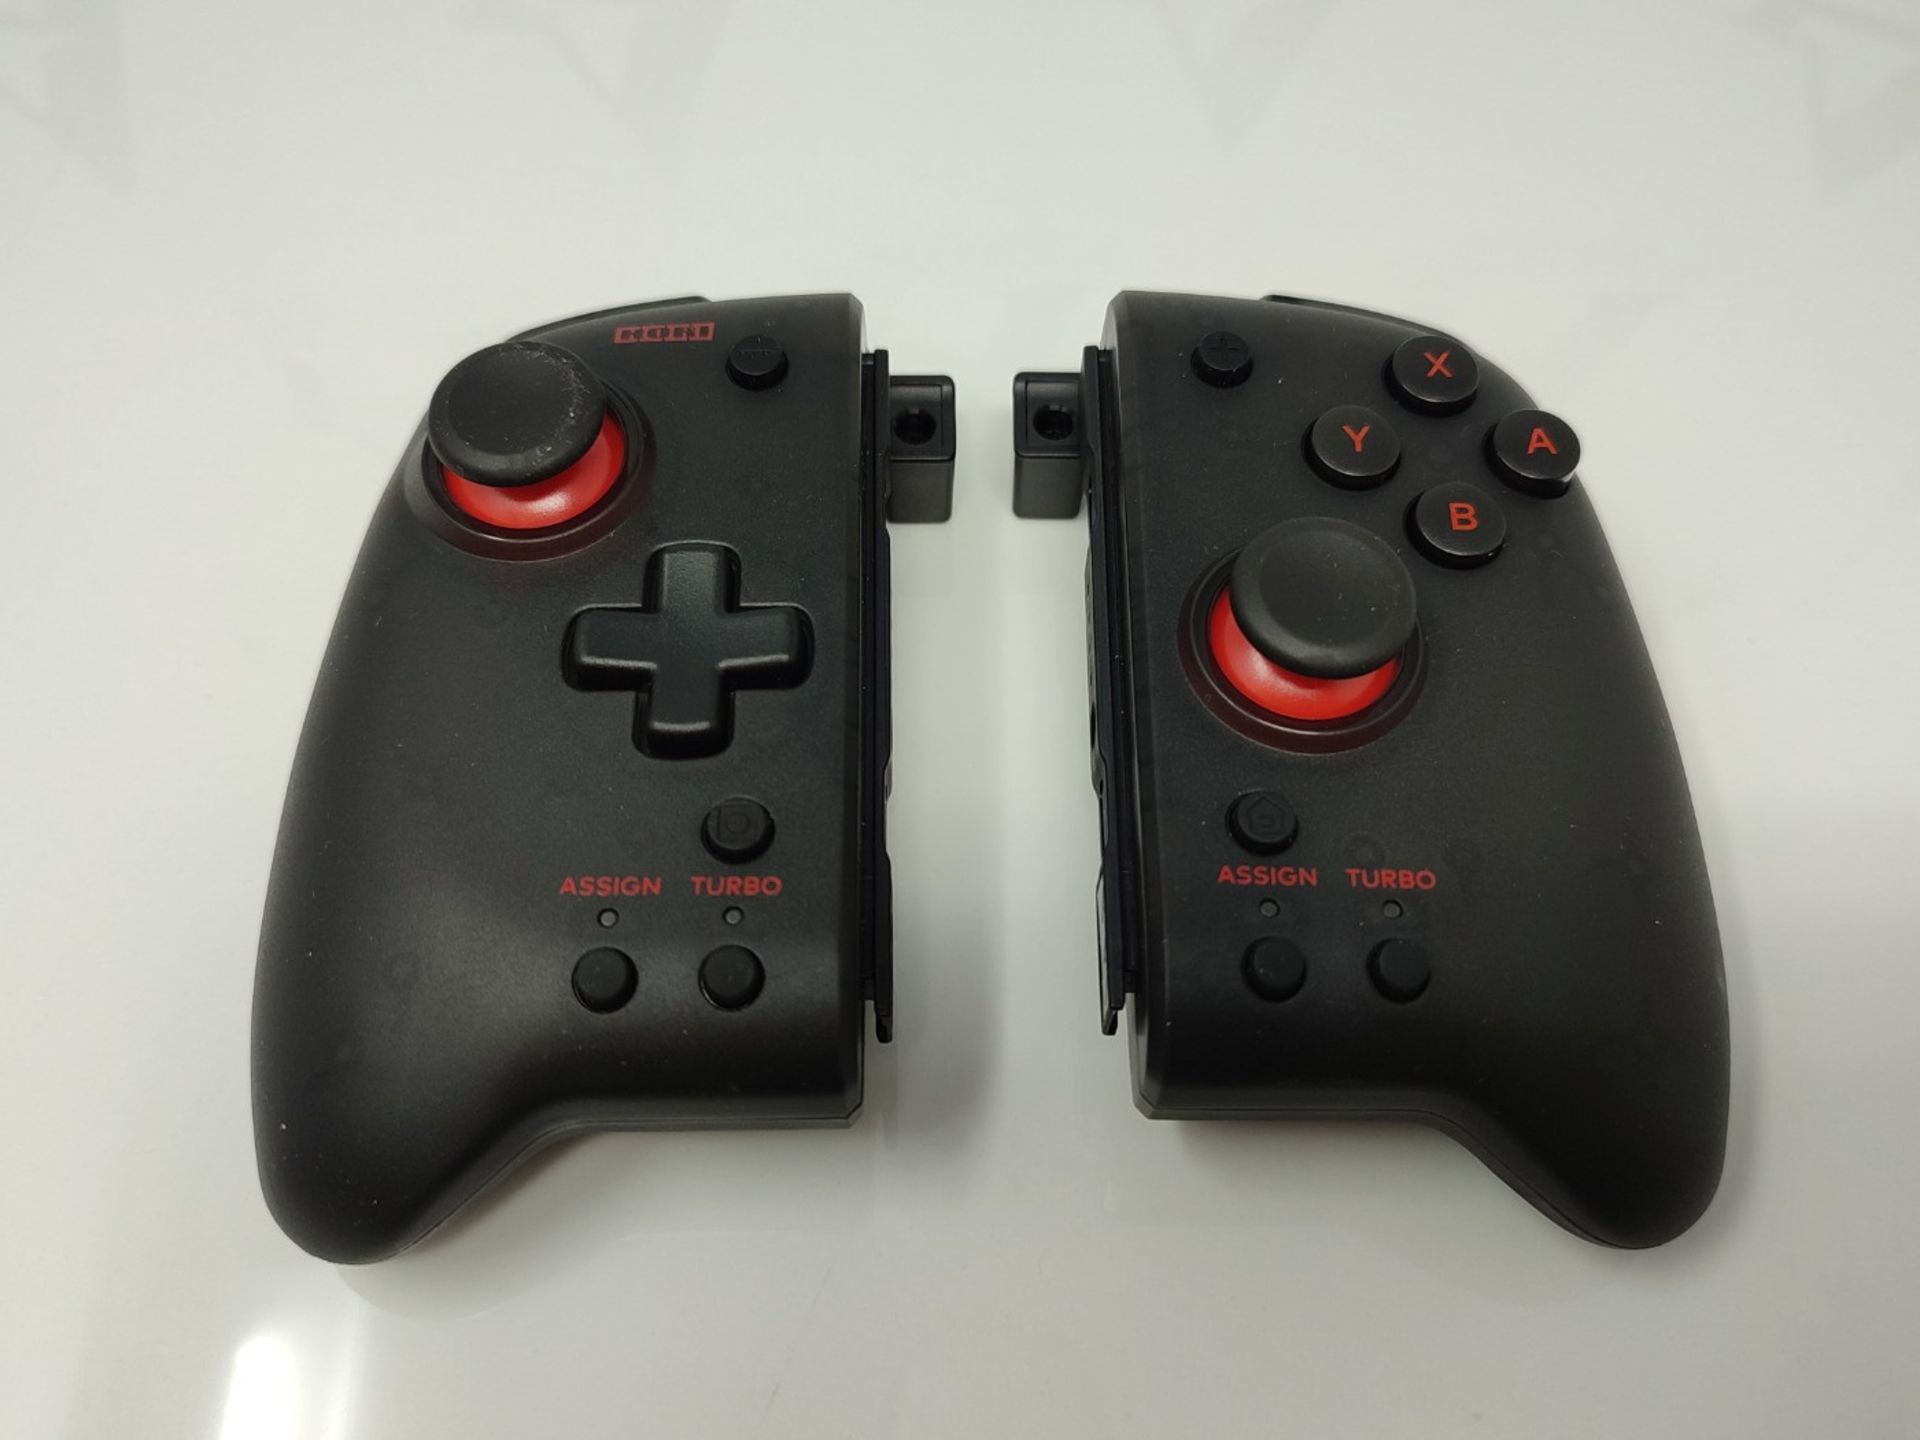 HORI - Split Pad Pro Controller (Black) for handheld mode (Nintendo Switch) - Official - Image 3 of 3